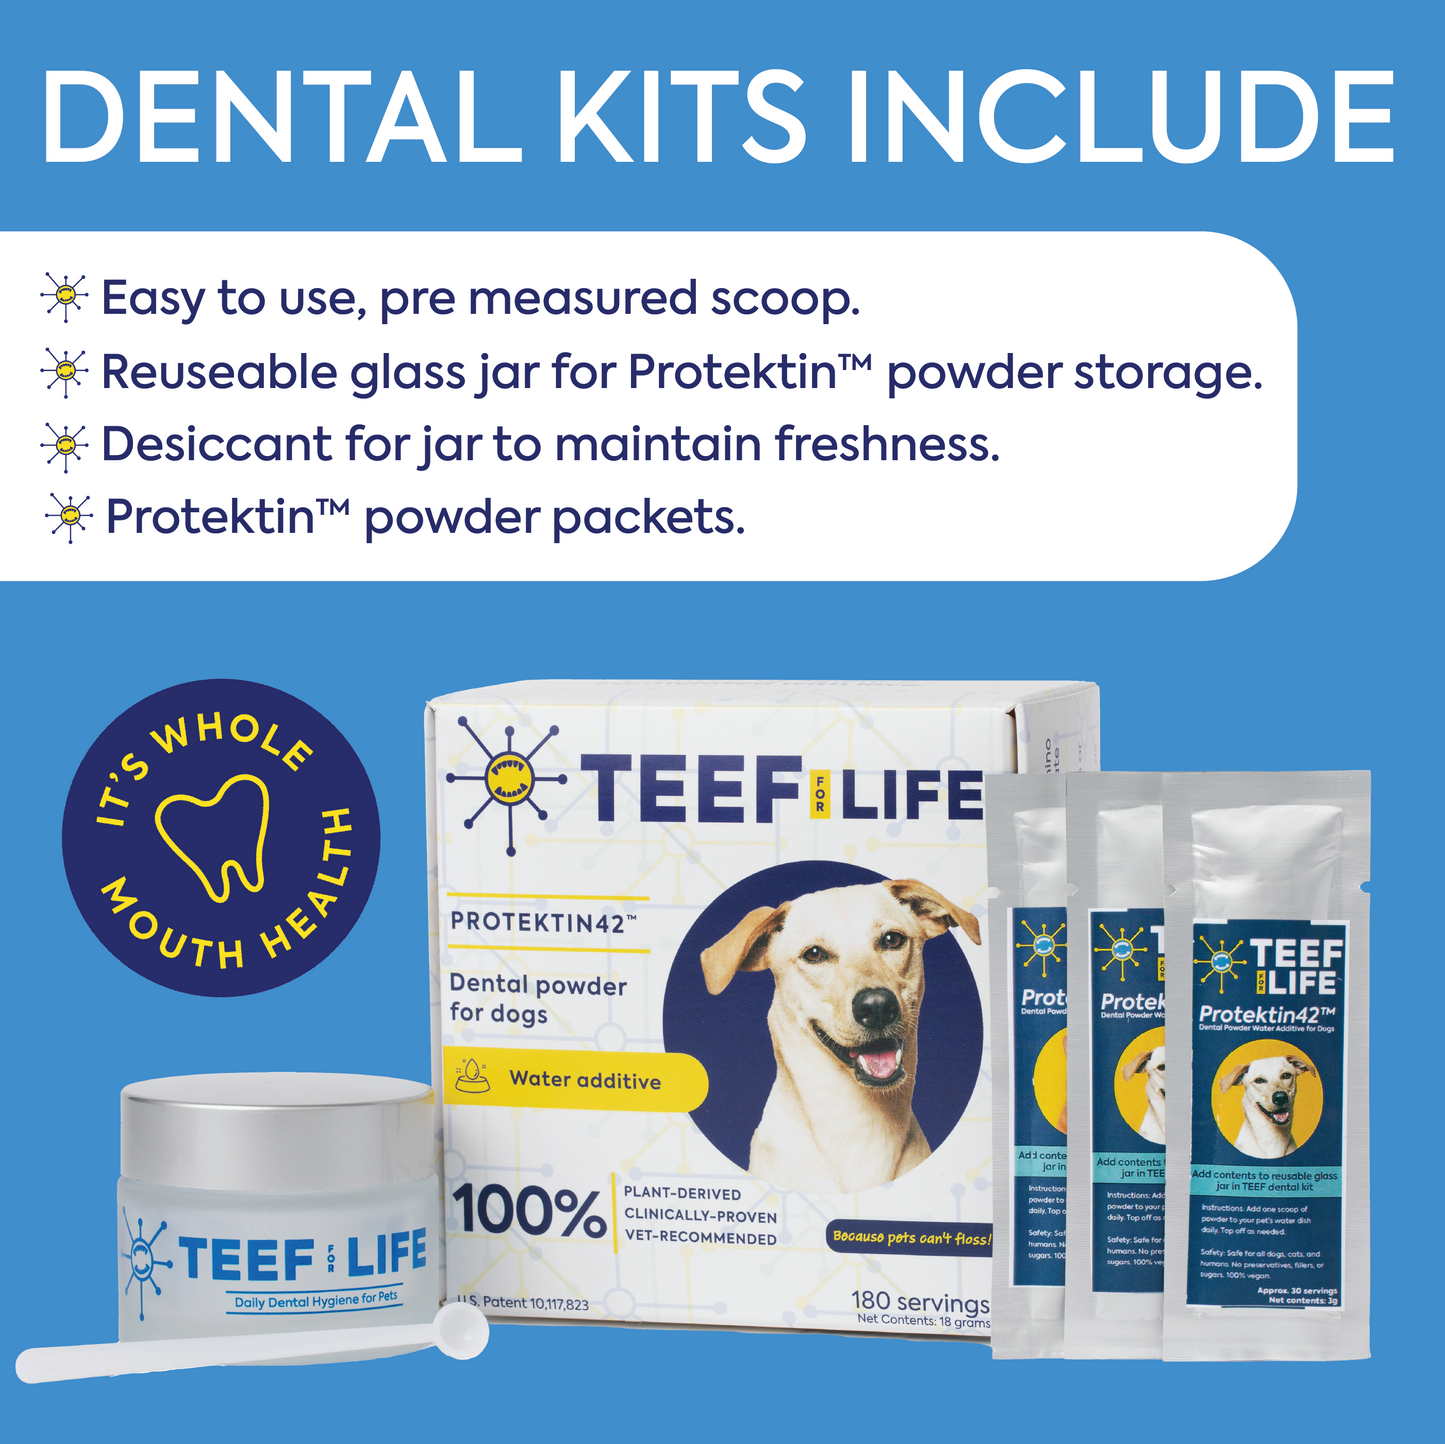 TEEF for Life - Protektin30™ - Dental Kit: Powder water additive for cats